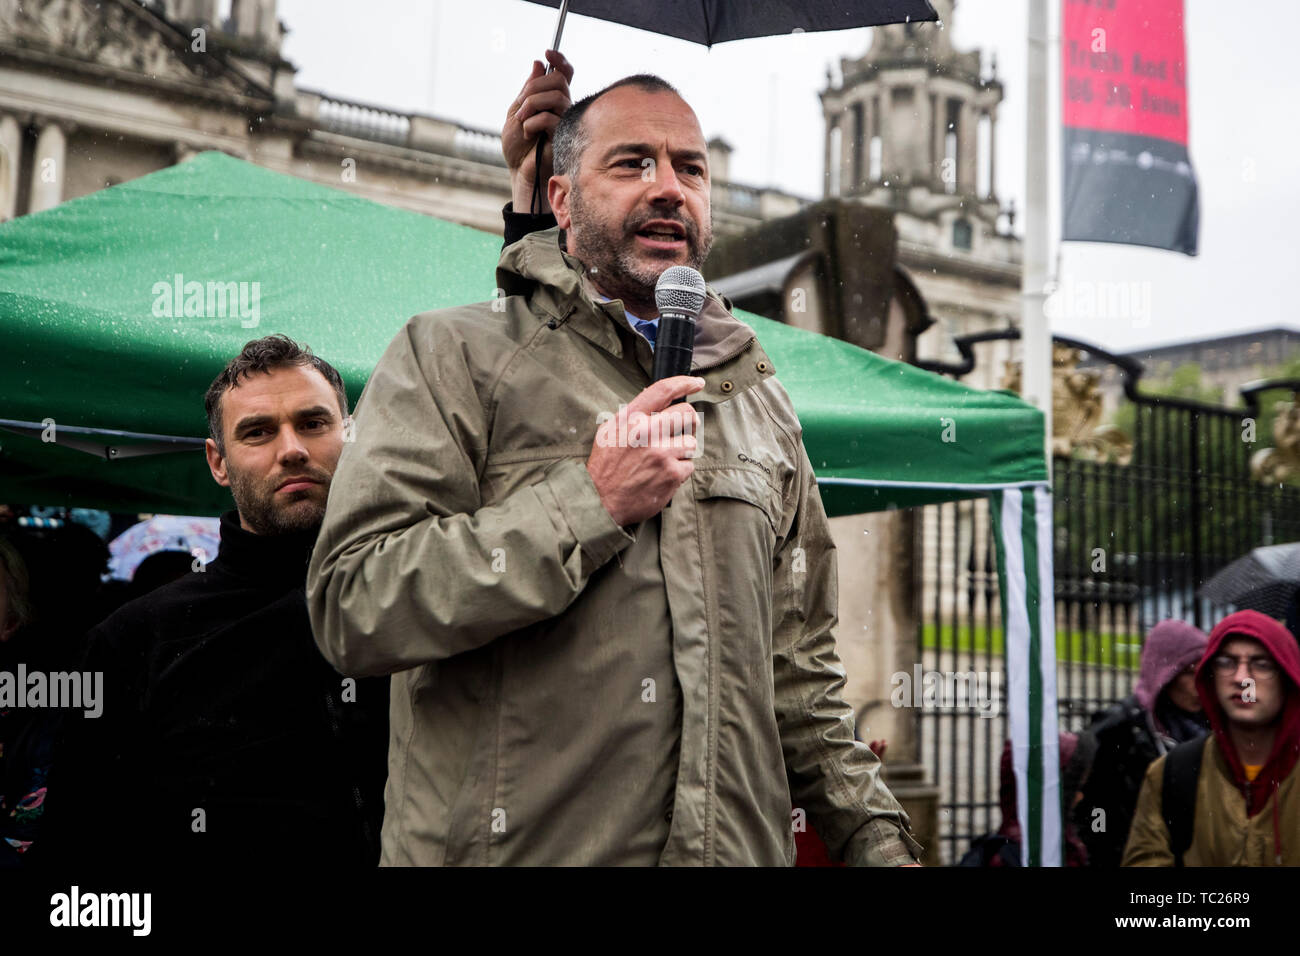 Patrick Corrigan of Amnesty International UK speaking during a 'Stop Trumpism' rally hosted by ExAct: Expat Action Group NI, at Belfast City Hall. Stock Photo